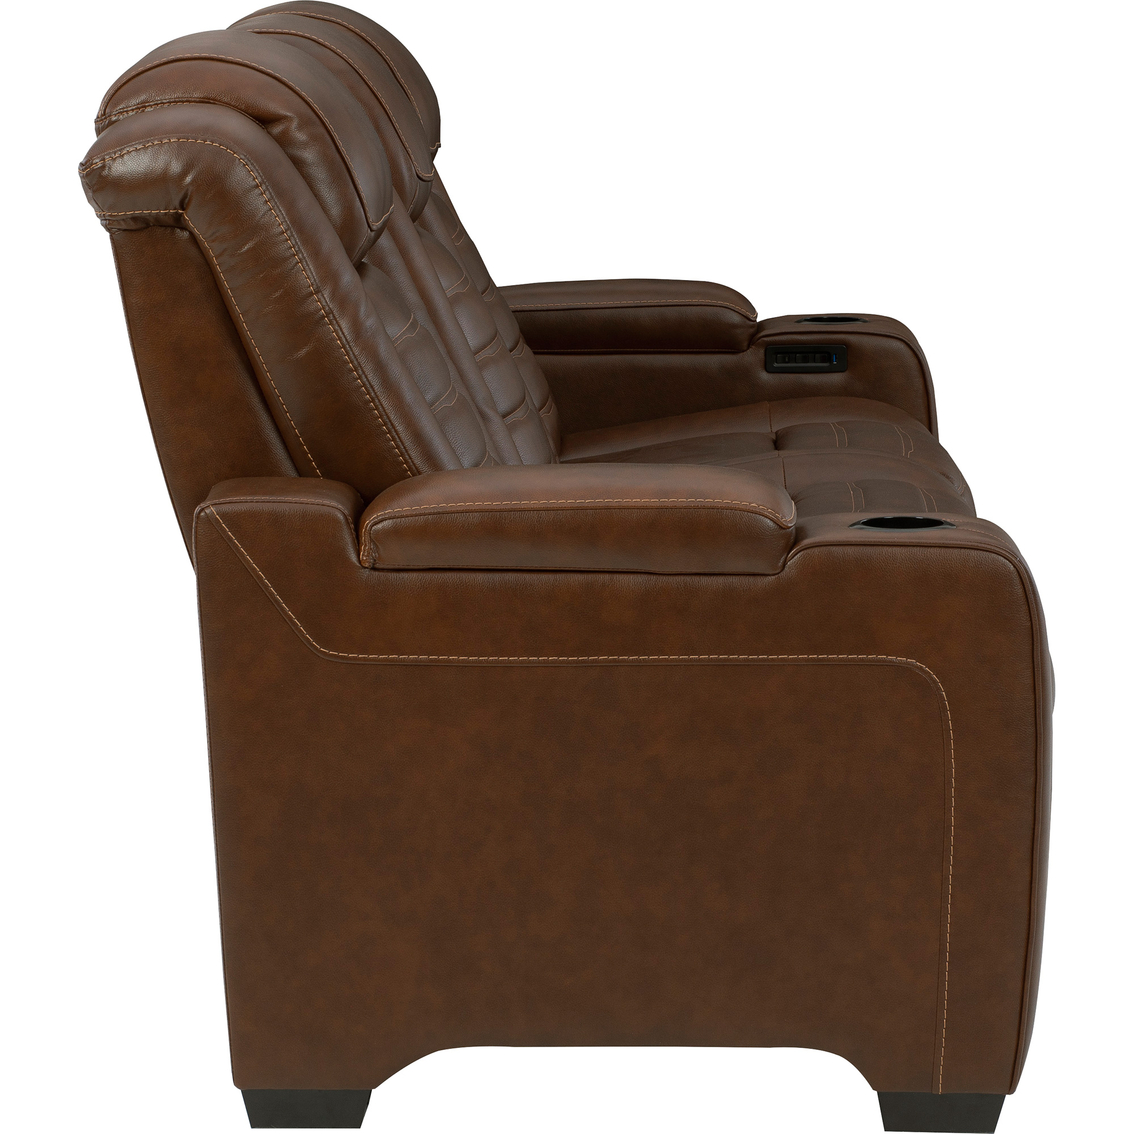 Signature Design by Ashley Backtrack Power Reclining Sofa with Adjustable Headrest - Image 4 of 10